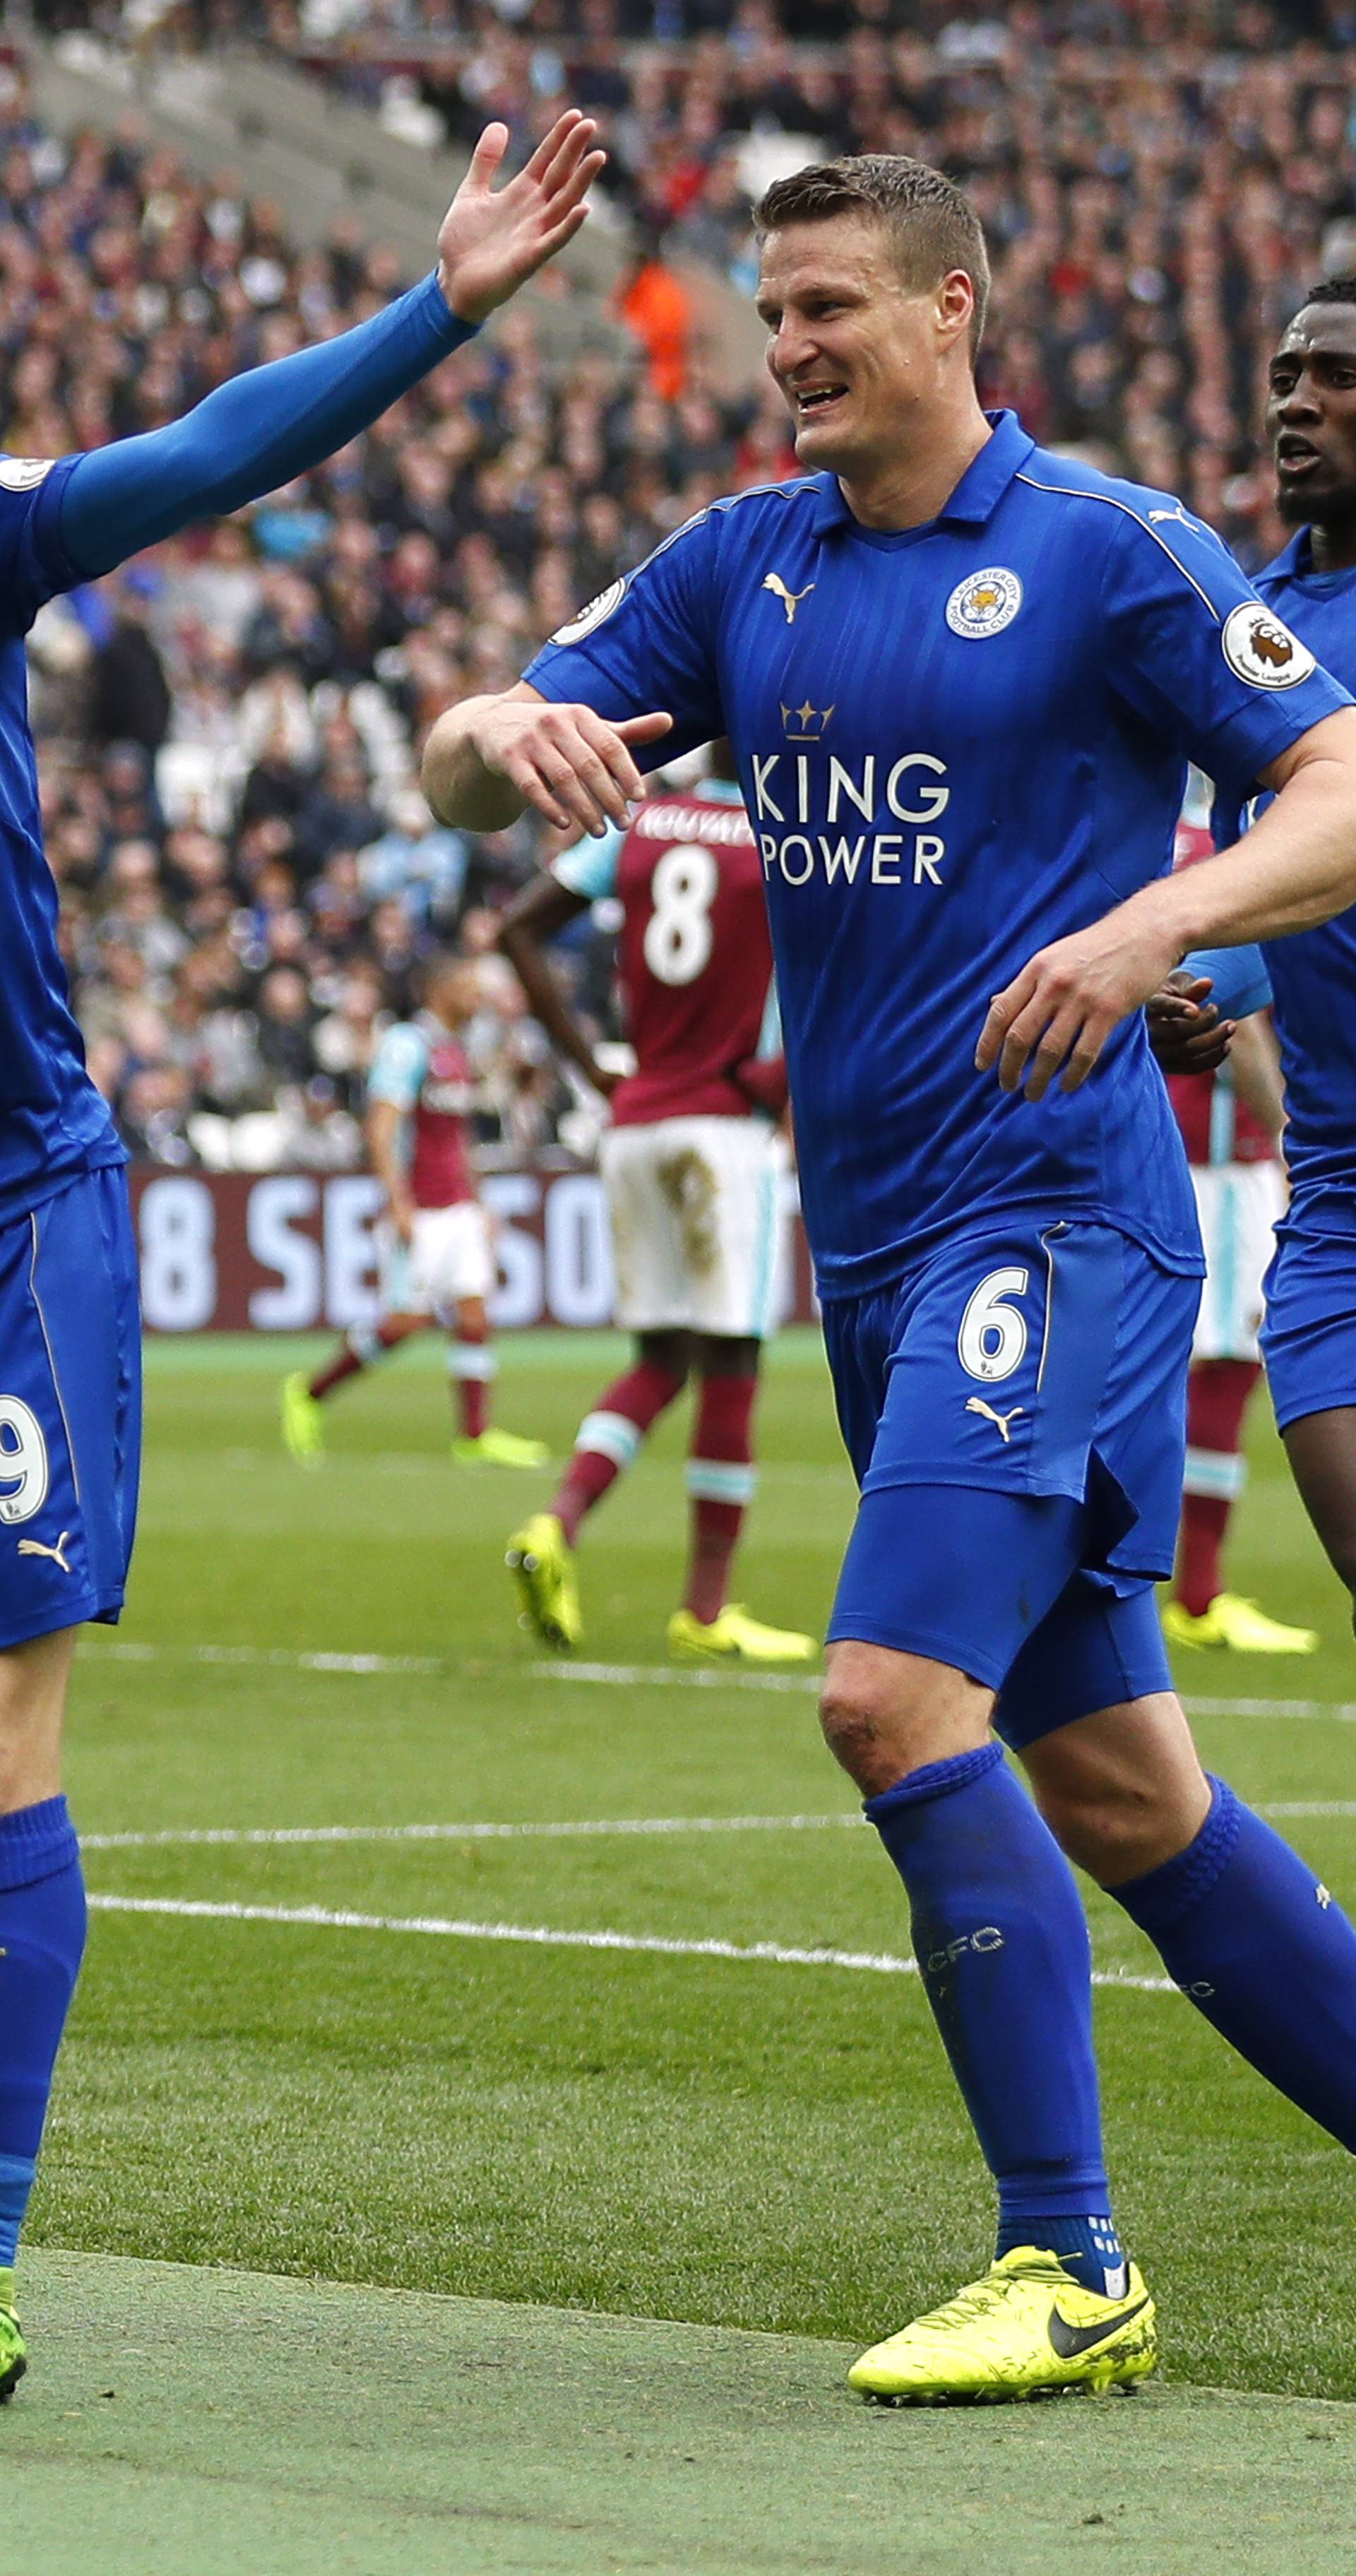 Leicester City's Jamie Vardy celebrates scoring their third goal with Robert Huth and Wilfred Ndidi